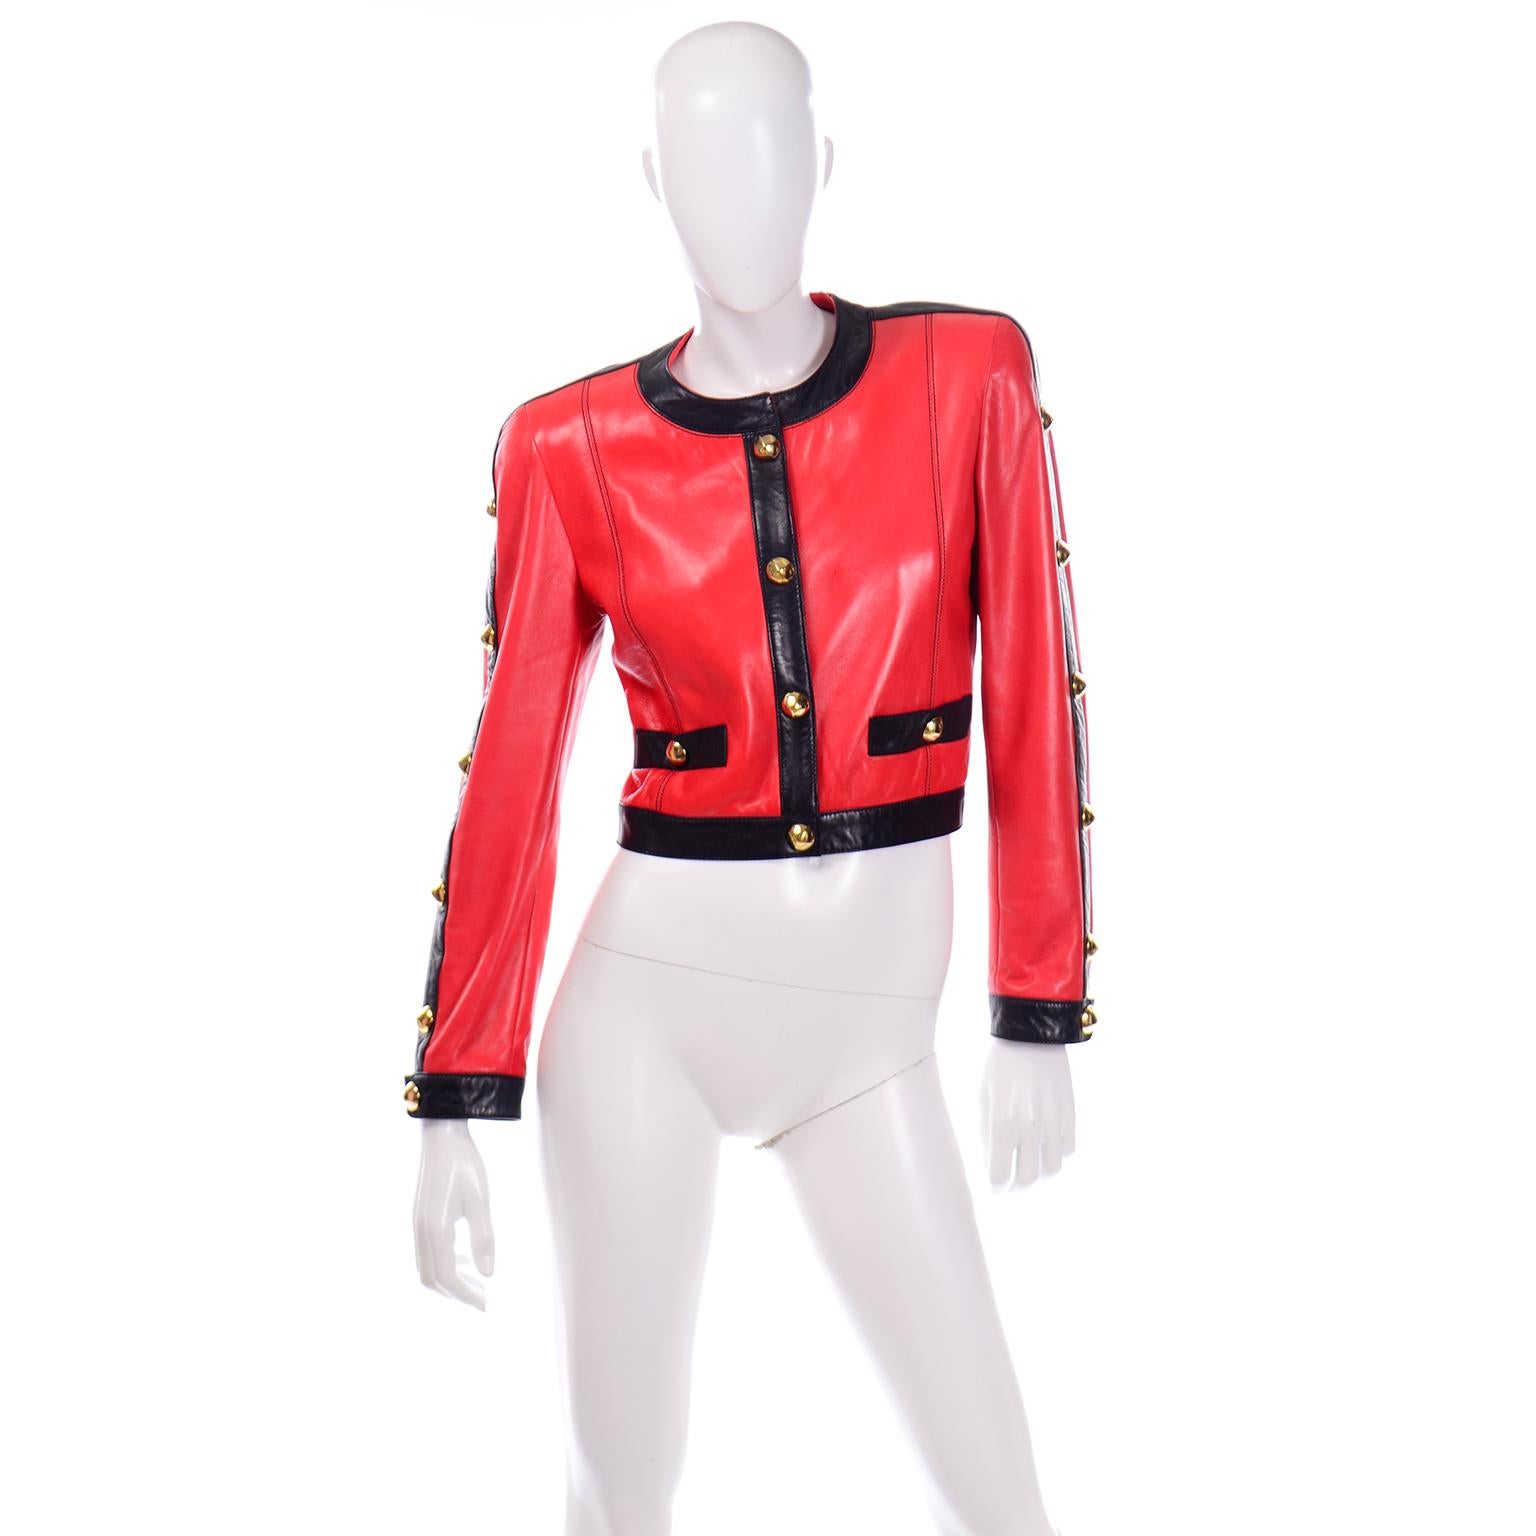 This vintage Escada short leather jacket is absolutely amazing! The jacket was designed by Margaretha Ley in the 1980's and is made of a luxurious red leather with black leather trim on the collar, hem, sleeves and pockets. There are fabulous big